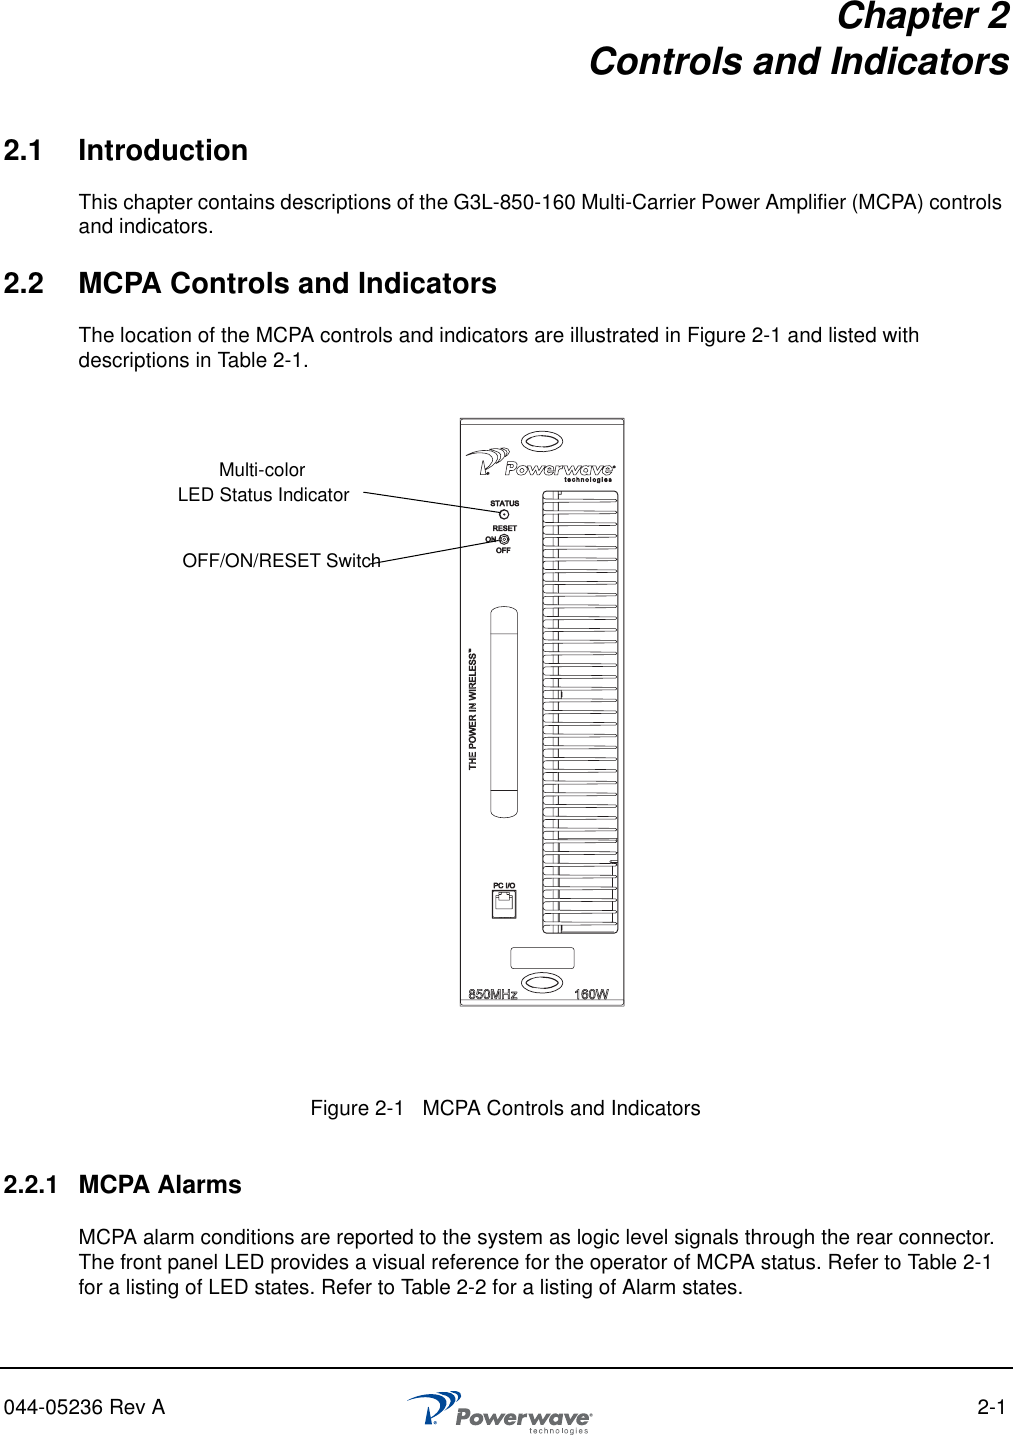 044-05236 Rev A 2-1Chapter 2Controls and Indicators2.1 IntroductionThis chapter contains descriptions of the G3L-850-160 Multi-Carrier Power Amplifier (MCPA) controls and indicators.2.2 MCPA Controls and IndicatorsThe location of the MCPA controls and indicators are illustrated in Figure 2-1 and listed with descriptions in Table 2-1.2.2.1 MCPA AlarmsMCPA alarm conditions are reported to the system as logic level signals through the rear connector. The front panel LED provides a visual reference for the operator of MCPA status. Refer to Table 2-1 for a listing of LED states. Refer to Table 2-2 for a listing of Alarm states.Figure 2-1   MCPA Controls and Indicators Multi-colorOFF/ON/RESET SwitchLED Status Indicator 